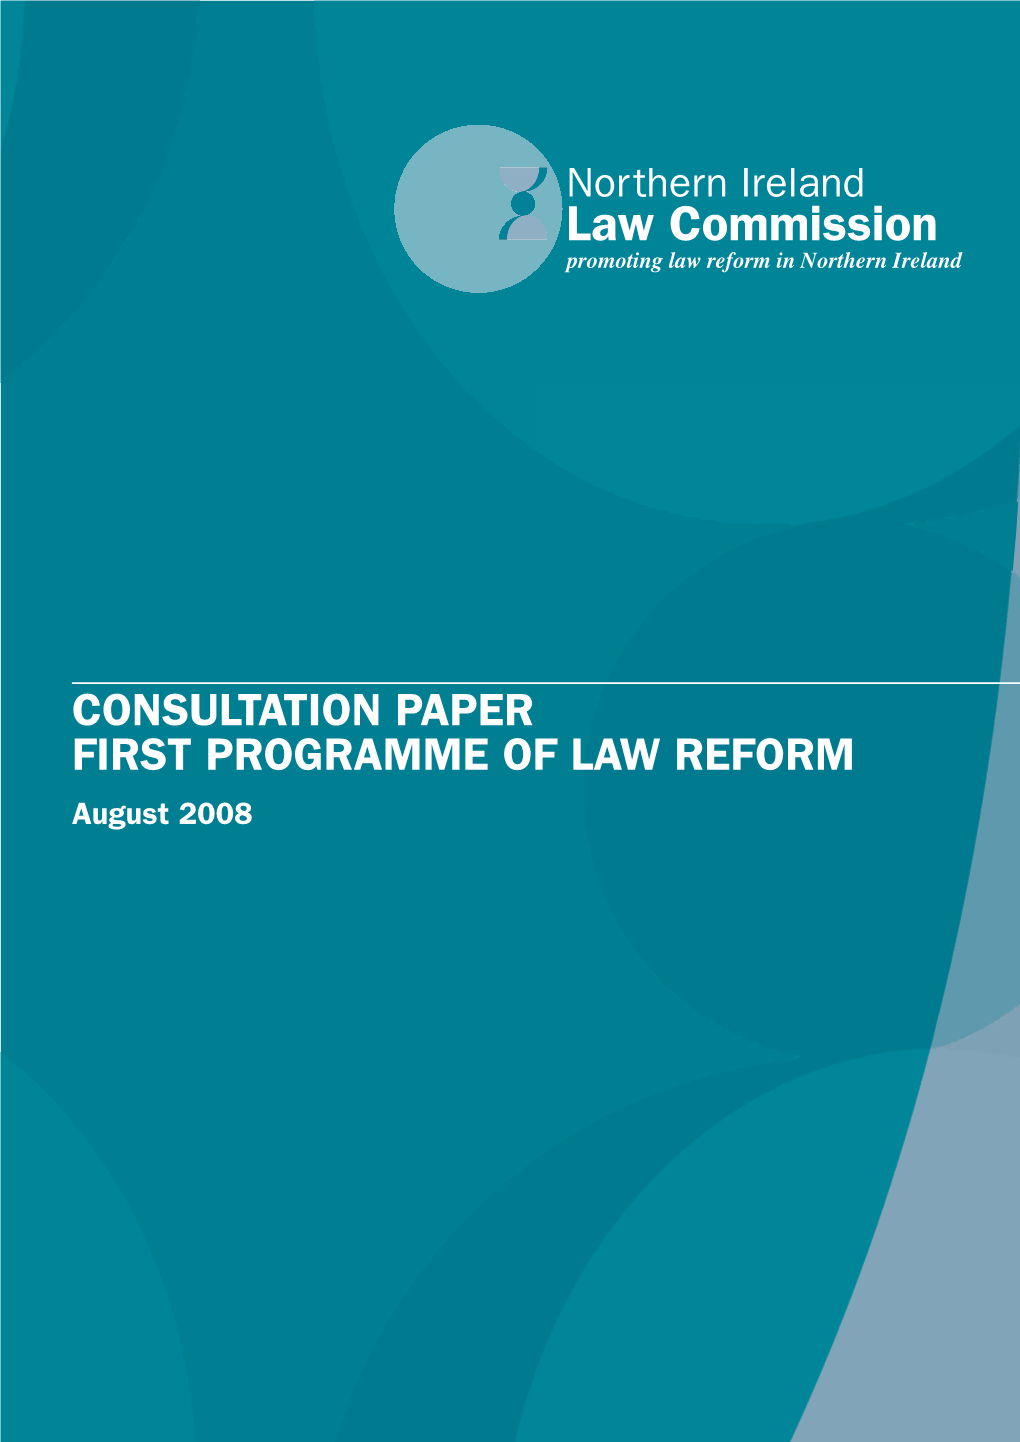 Northern Ireland Law Commission Promoting Law Reform in Northern Ireland